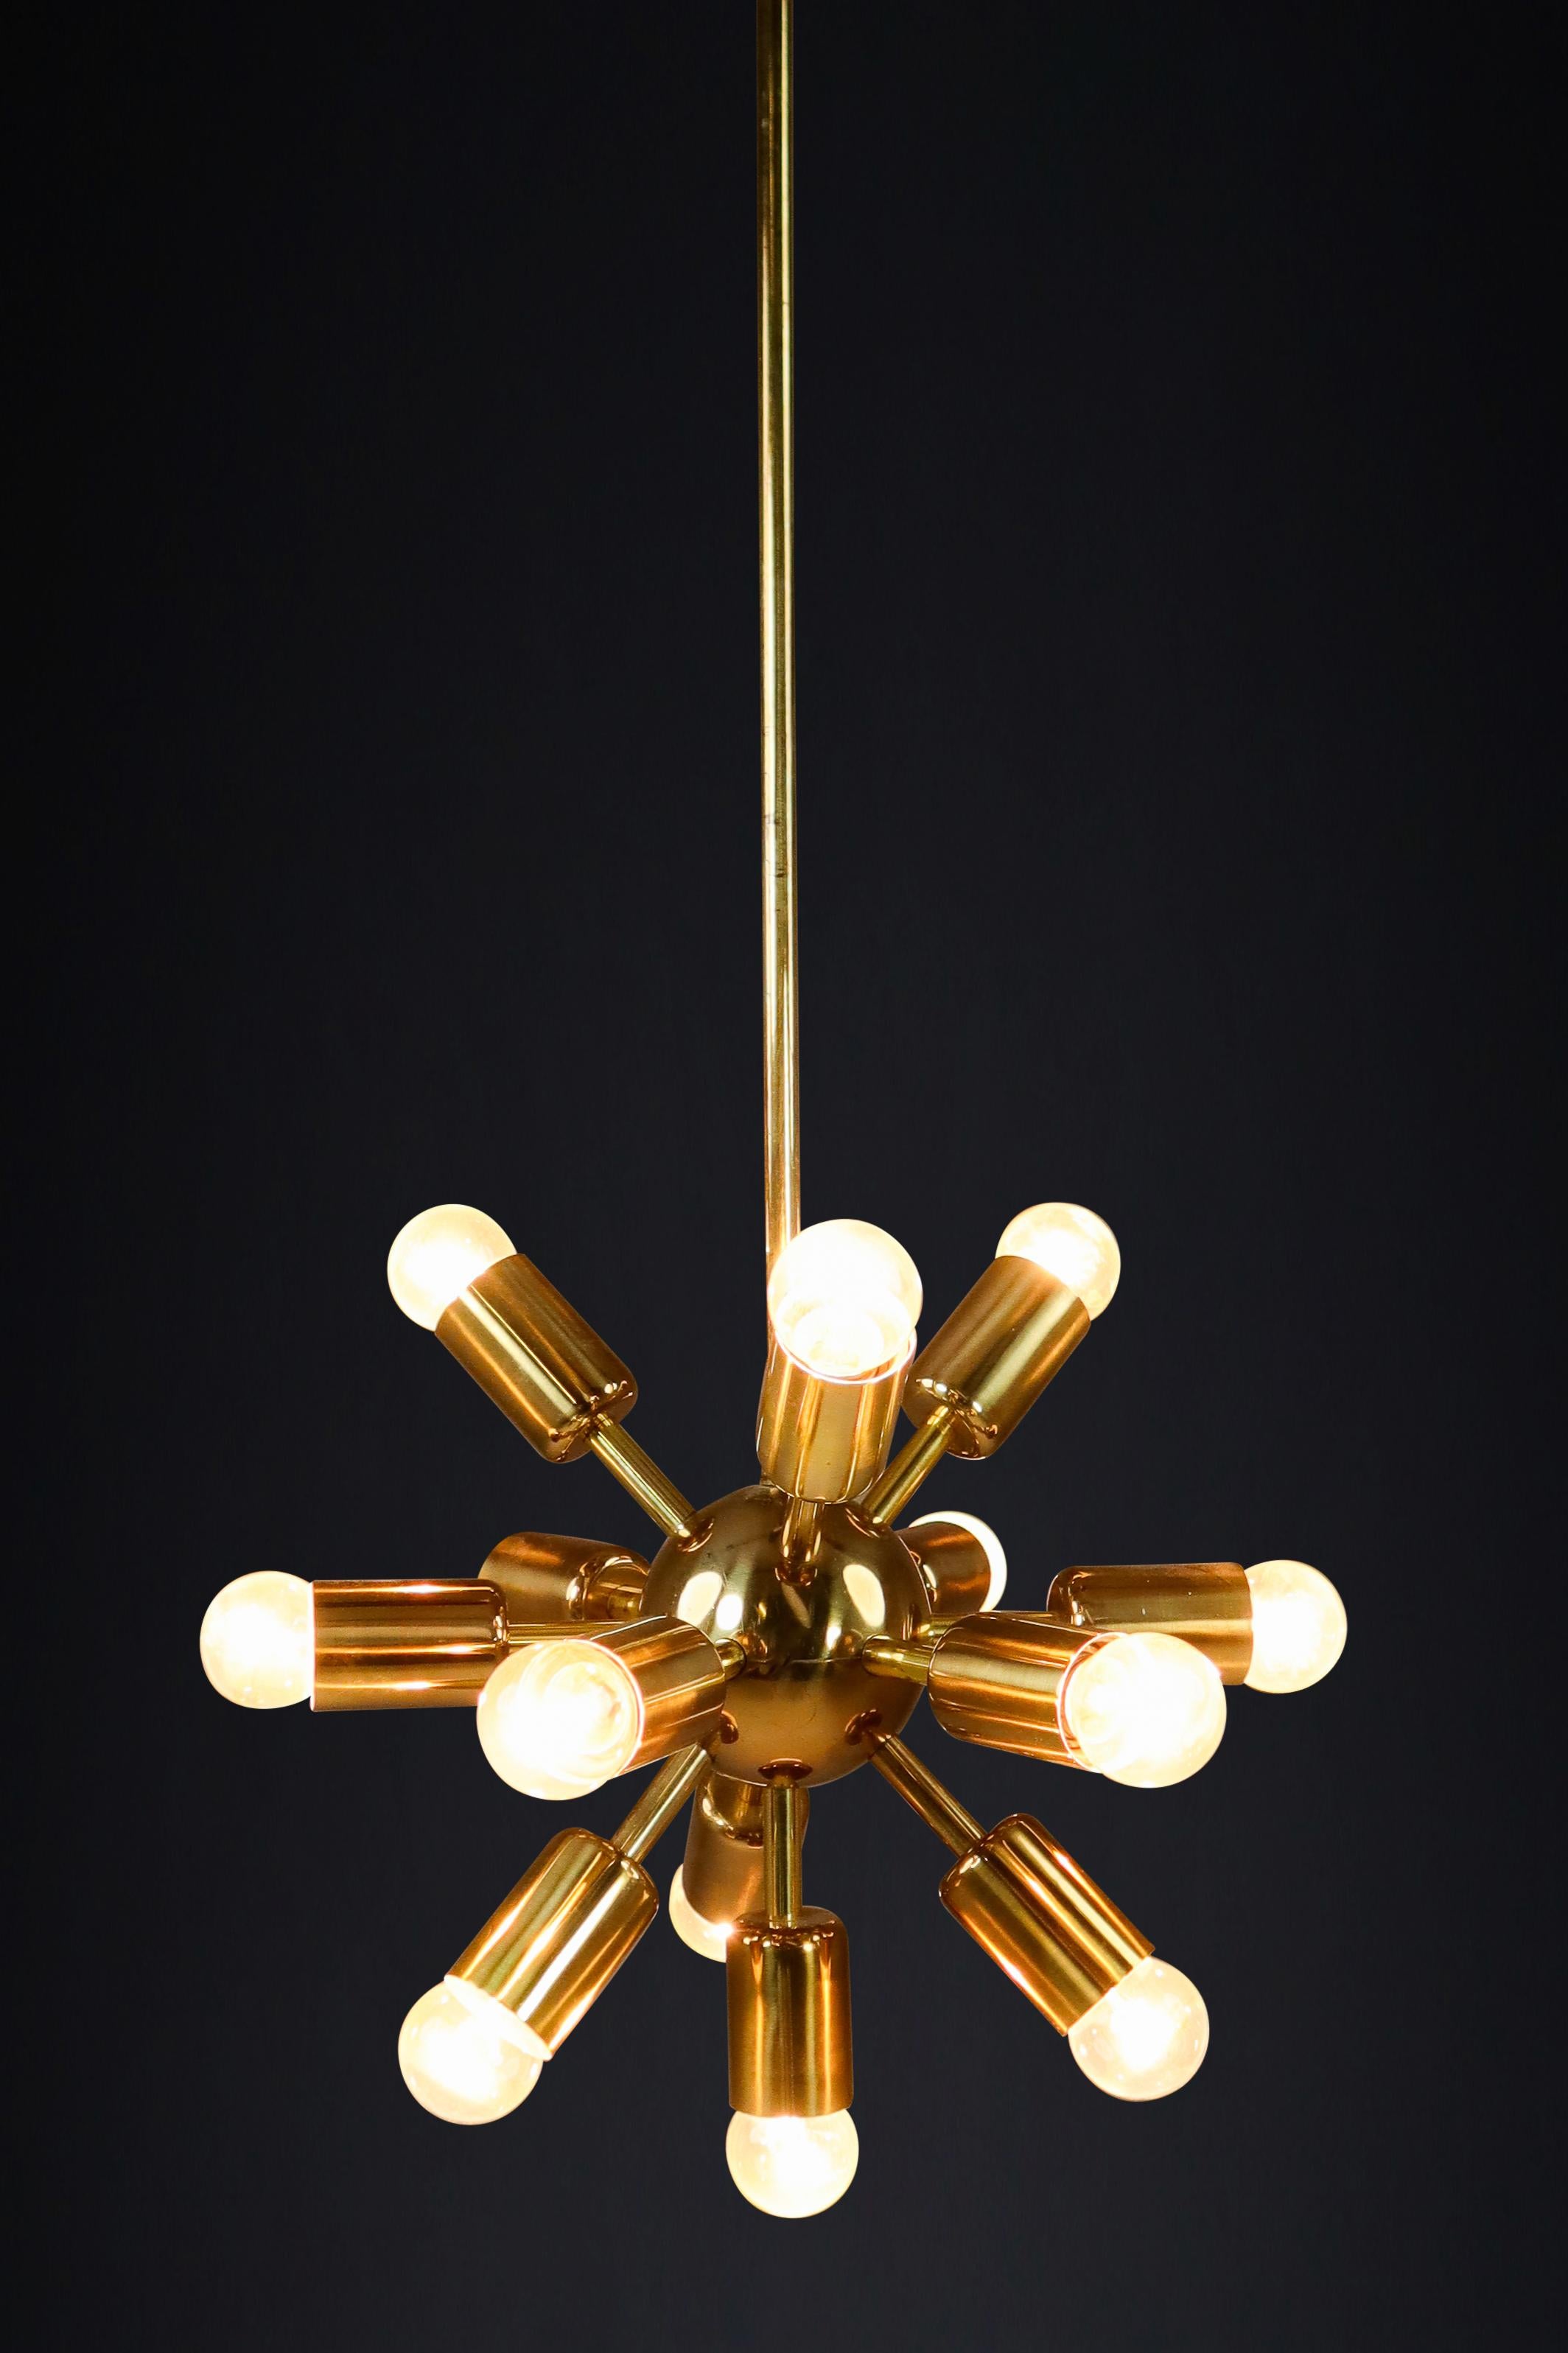 Midcentury Brass Sputnik Chandeliers with Twelve Lights by Drupol, Praque 1960s In Good Condition For Sale In Almelo, NL